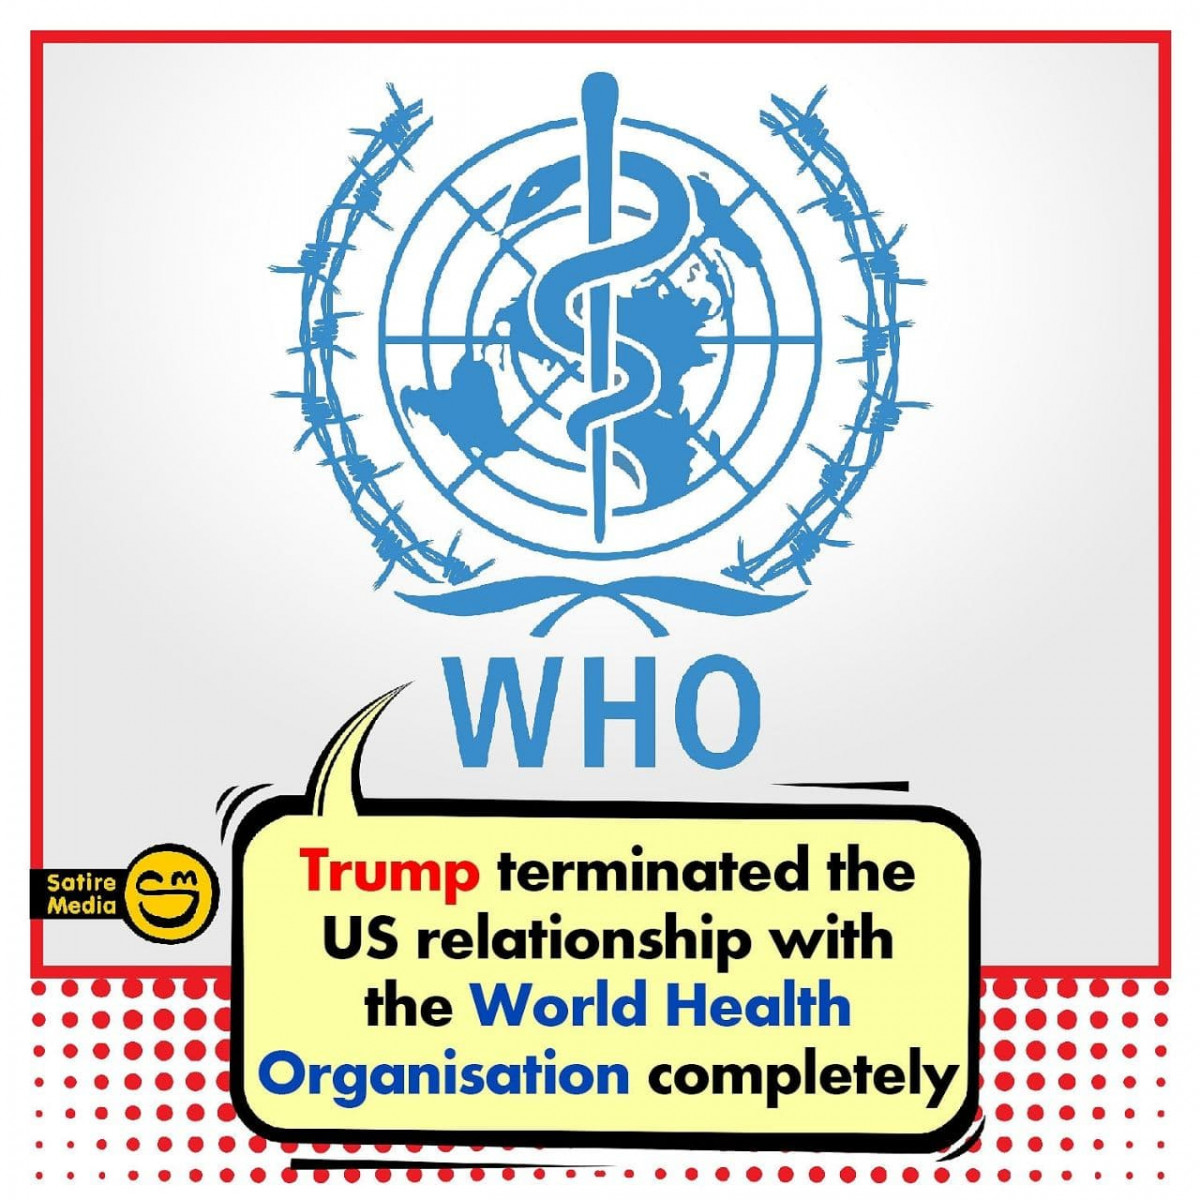 Trump terminated the US relationship with the World Health Organisation completely